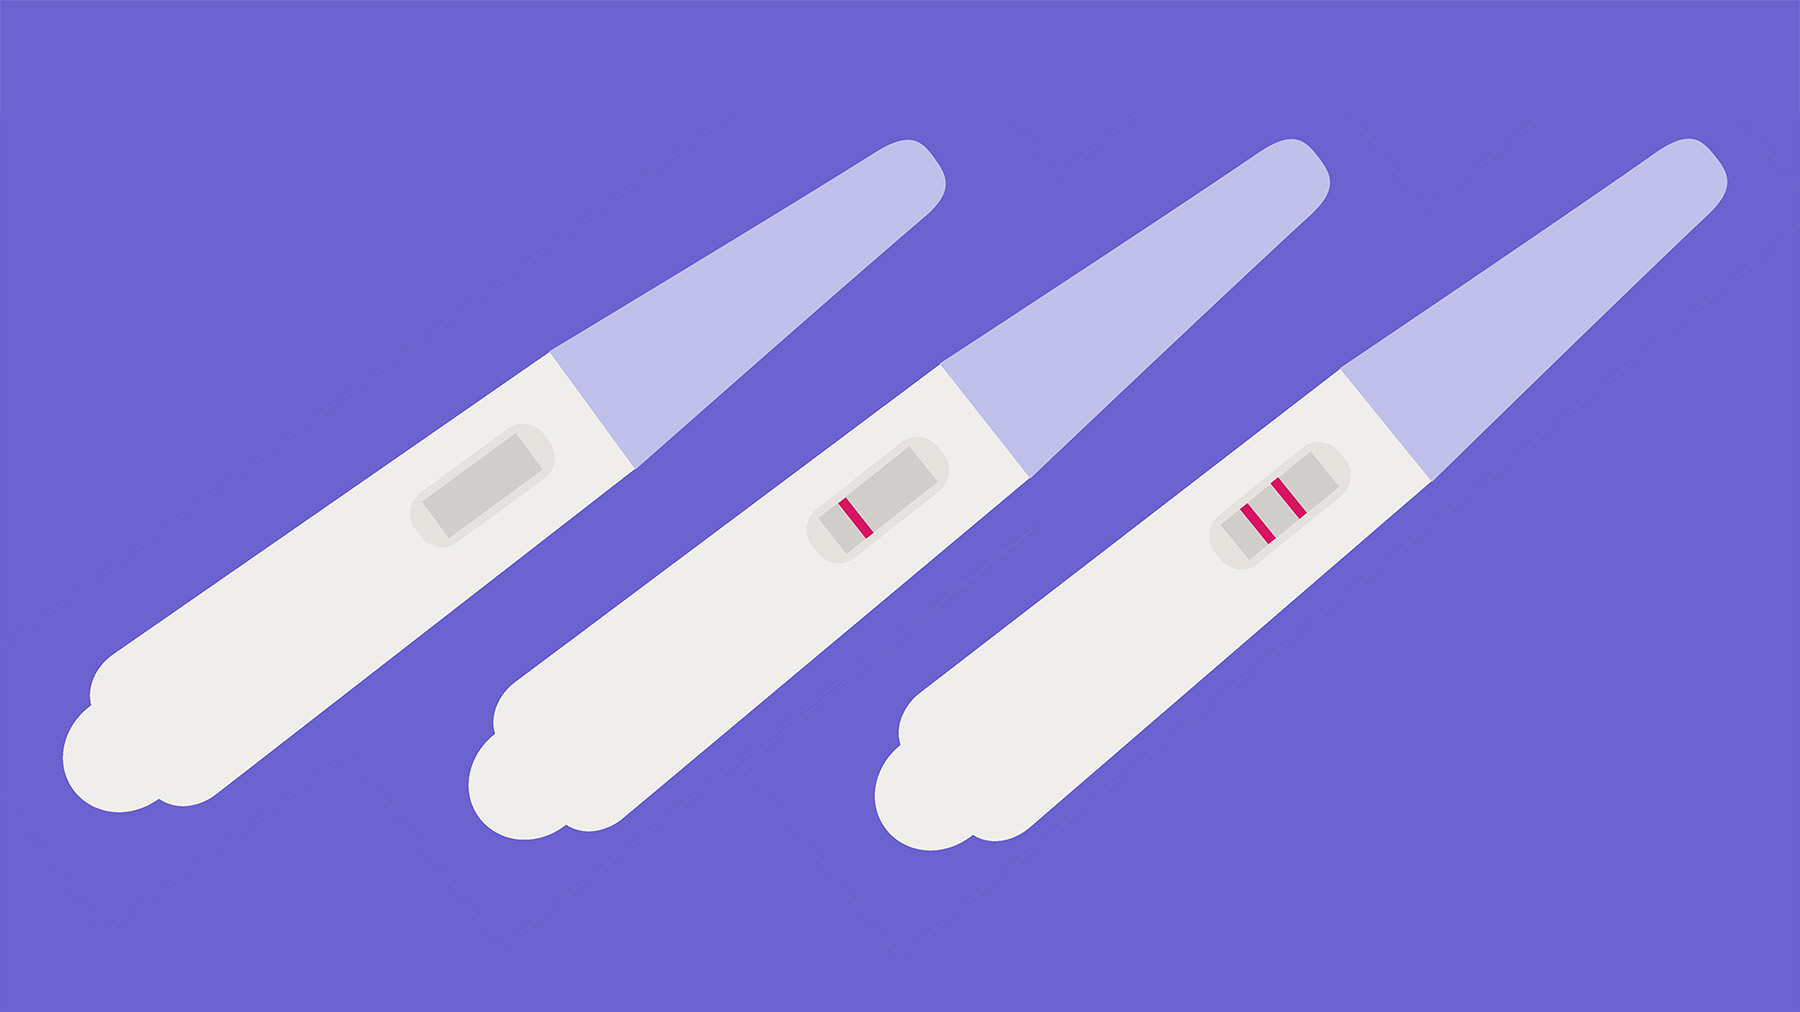 An illustration of three pregnancy tests showing different results